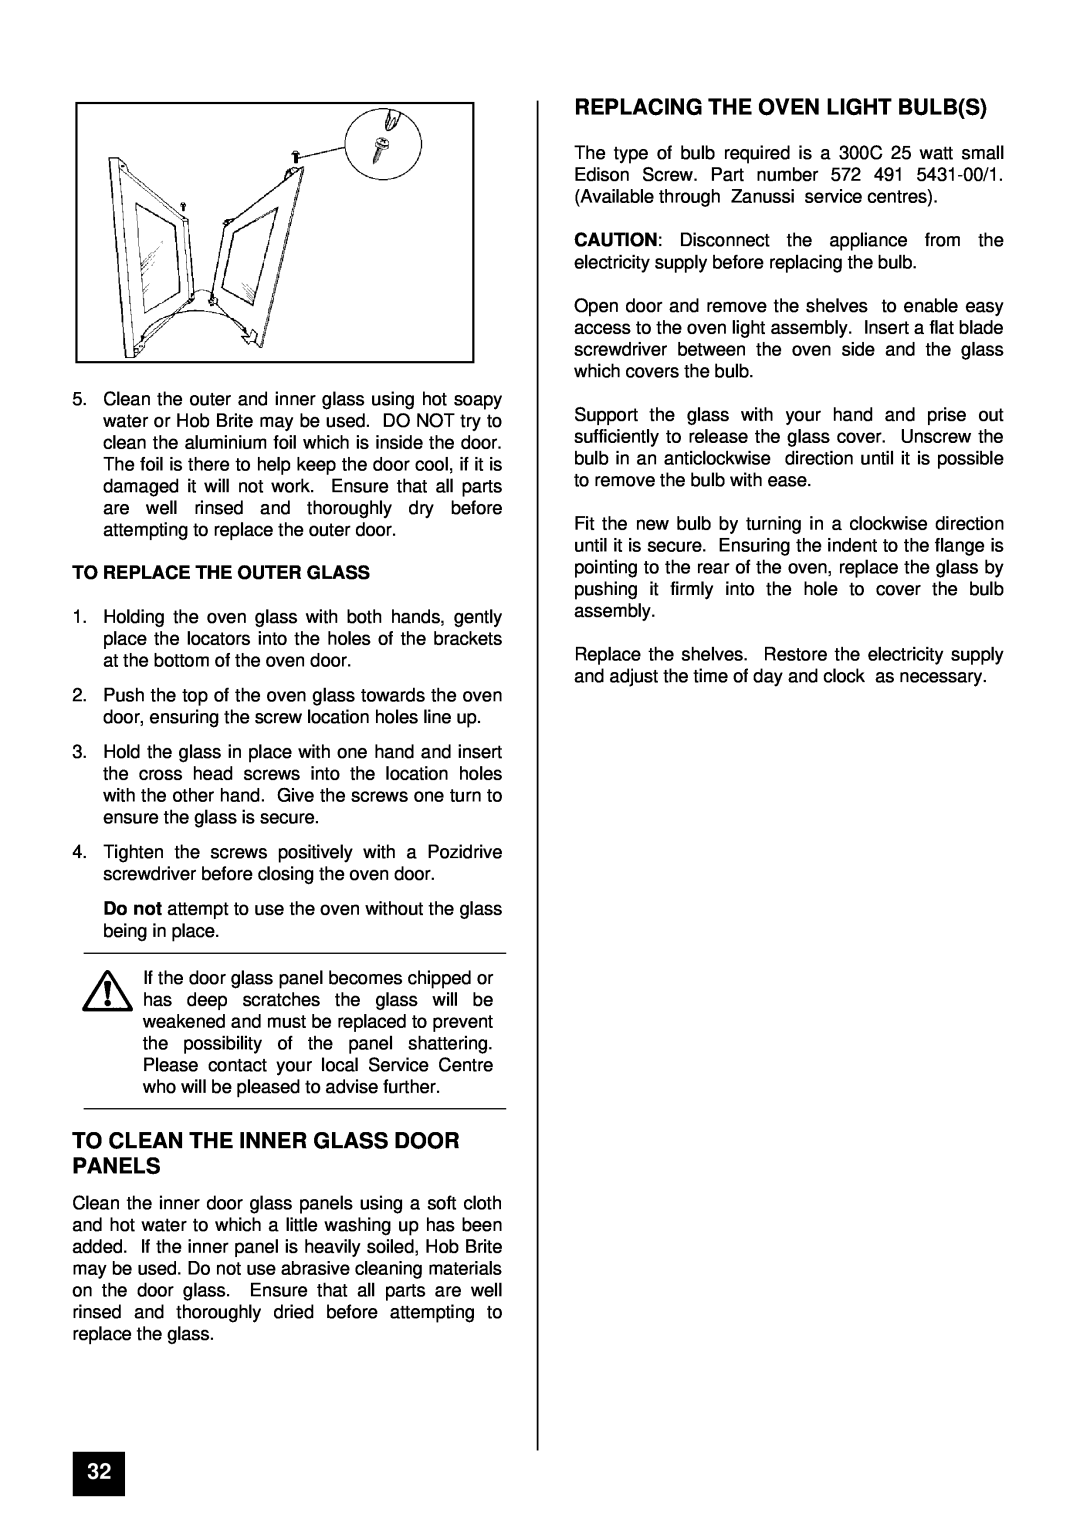 Zanussi ZCE 7800 manual To Clean The Inner Glass Door Panels, Replacing The Oven Light Bulbs, To Replace The Outer Glass 